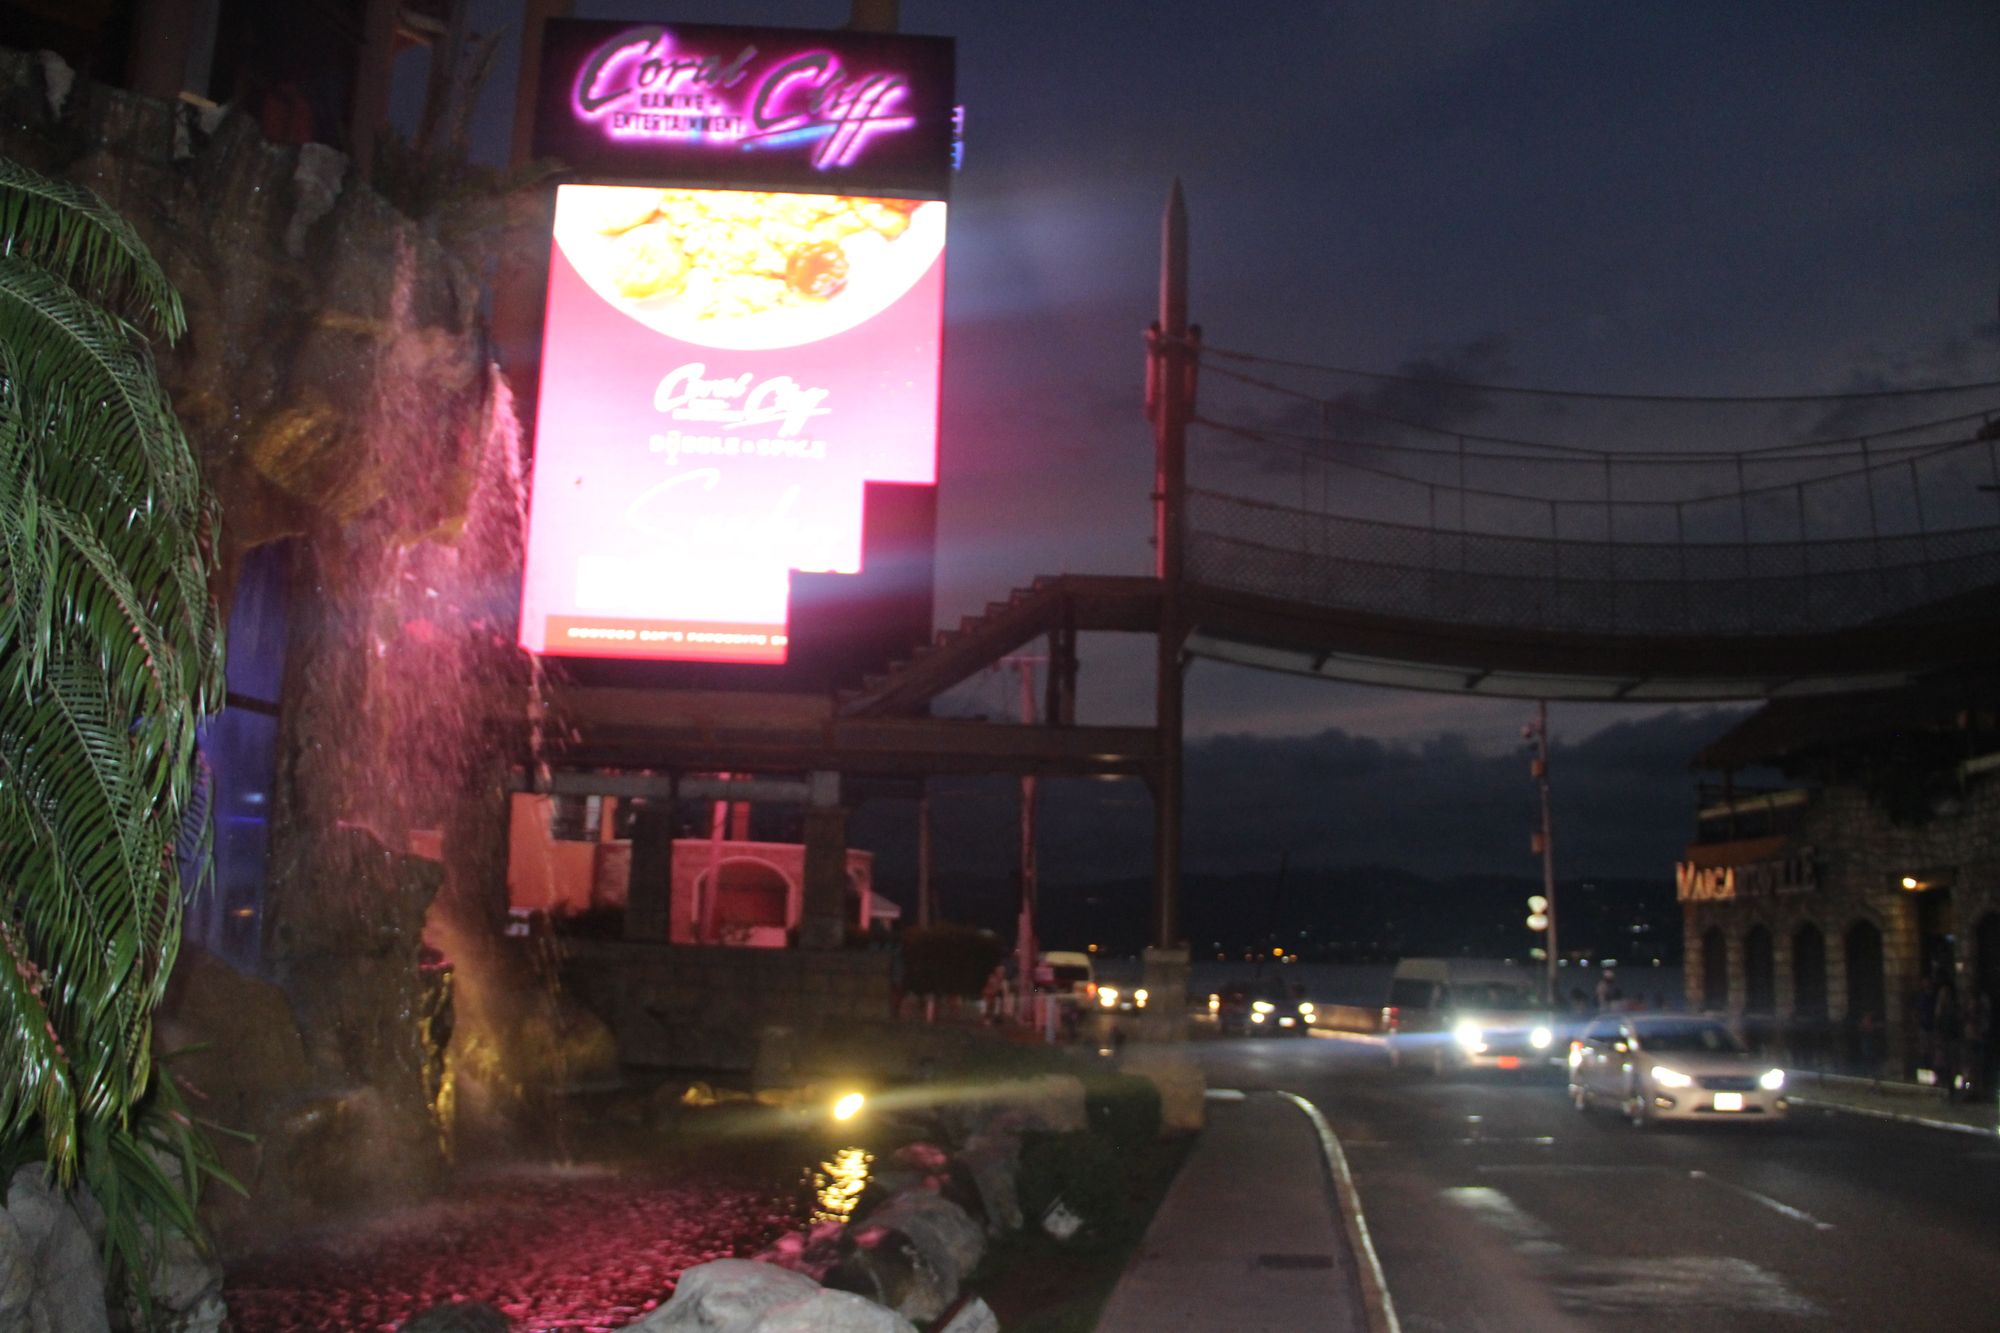 A relatively blurred image of Montego Bay at night, with cars passing by a strip, replete with a Gaming and Entertainment center called "Coral Cliff," lit up in pink.